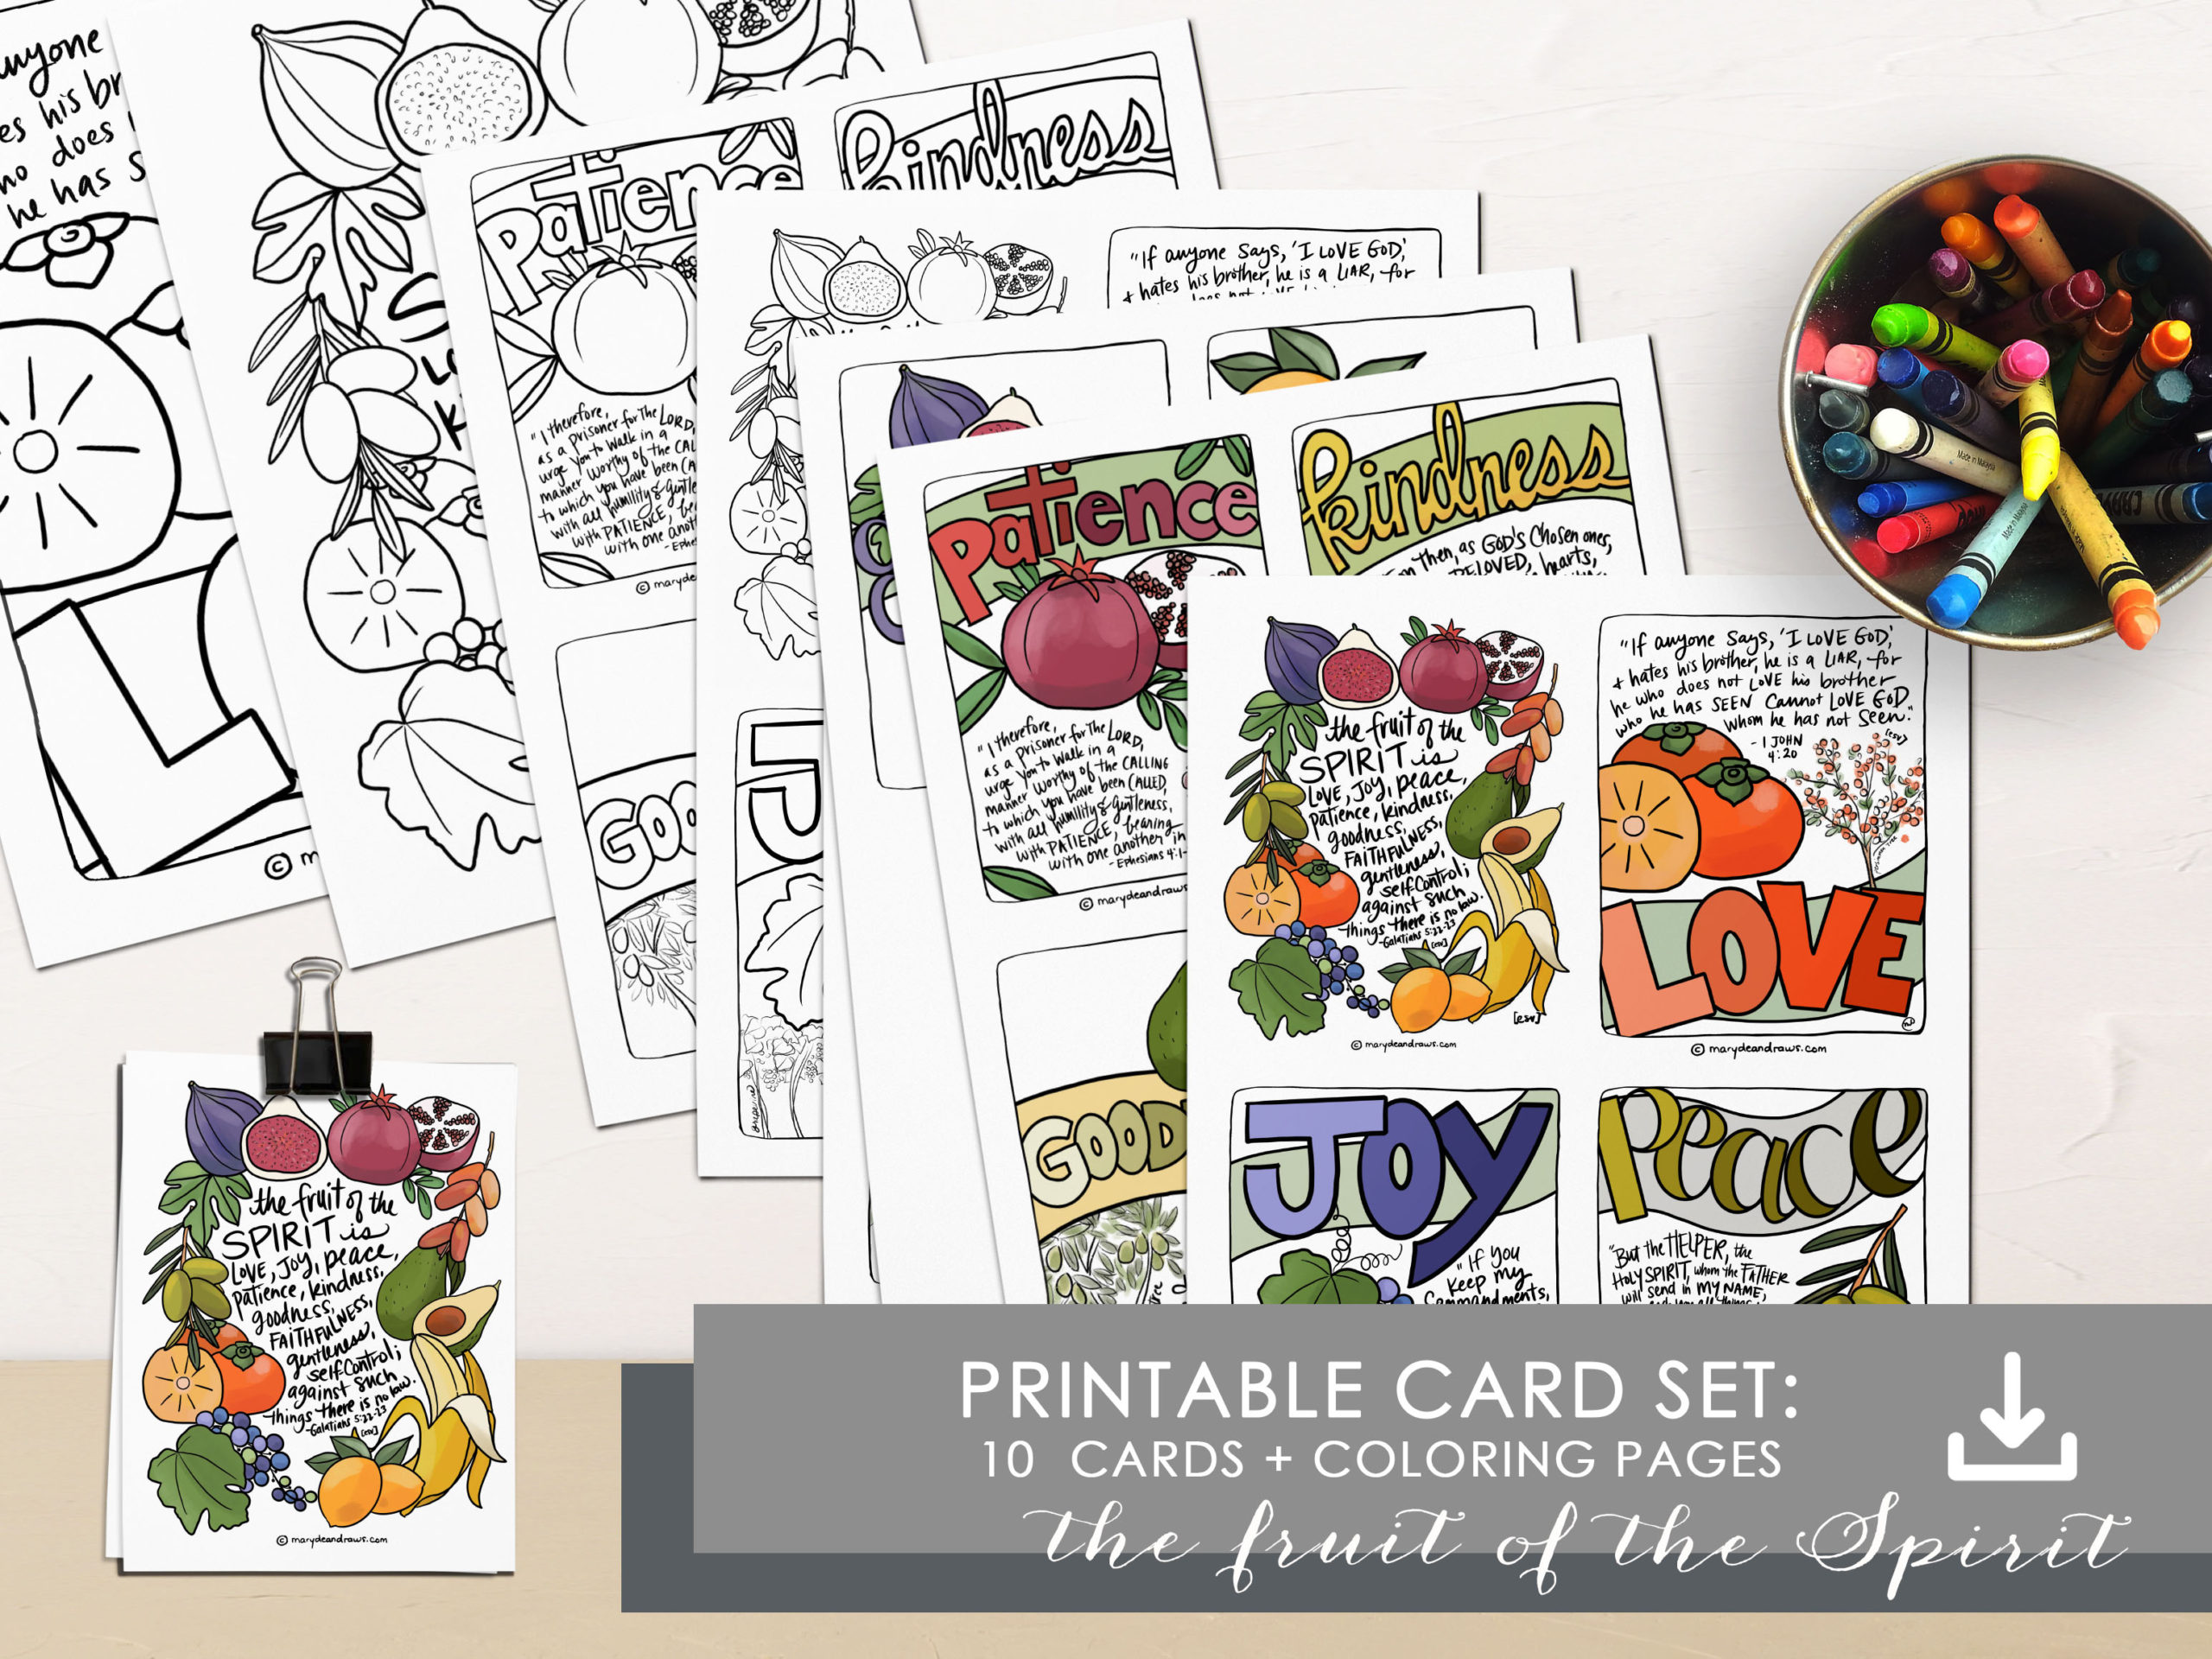 Printable bible verse coloring pages cards fruits of the spirit